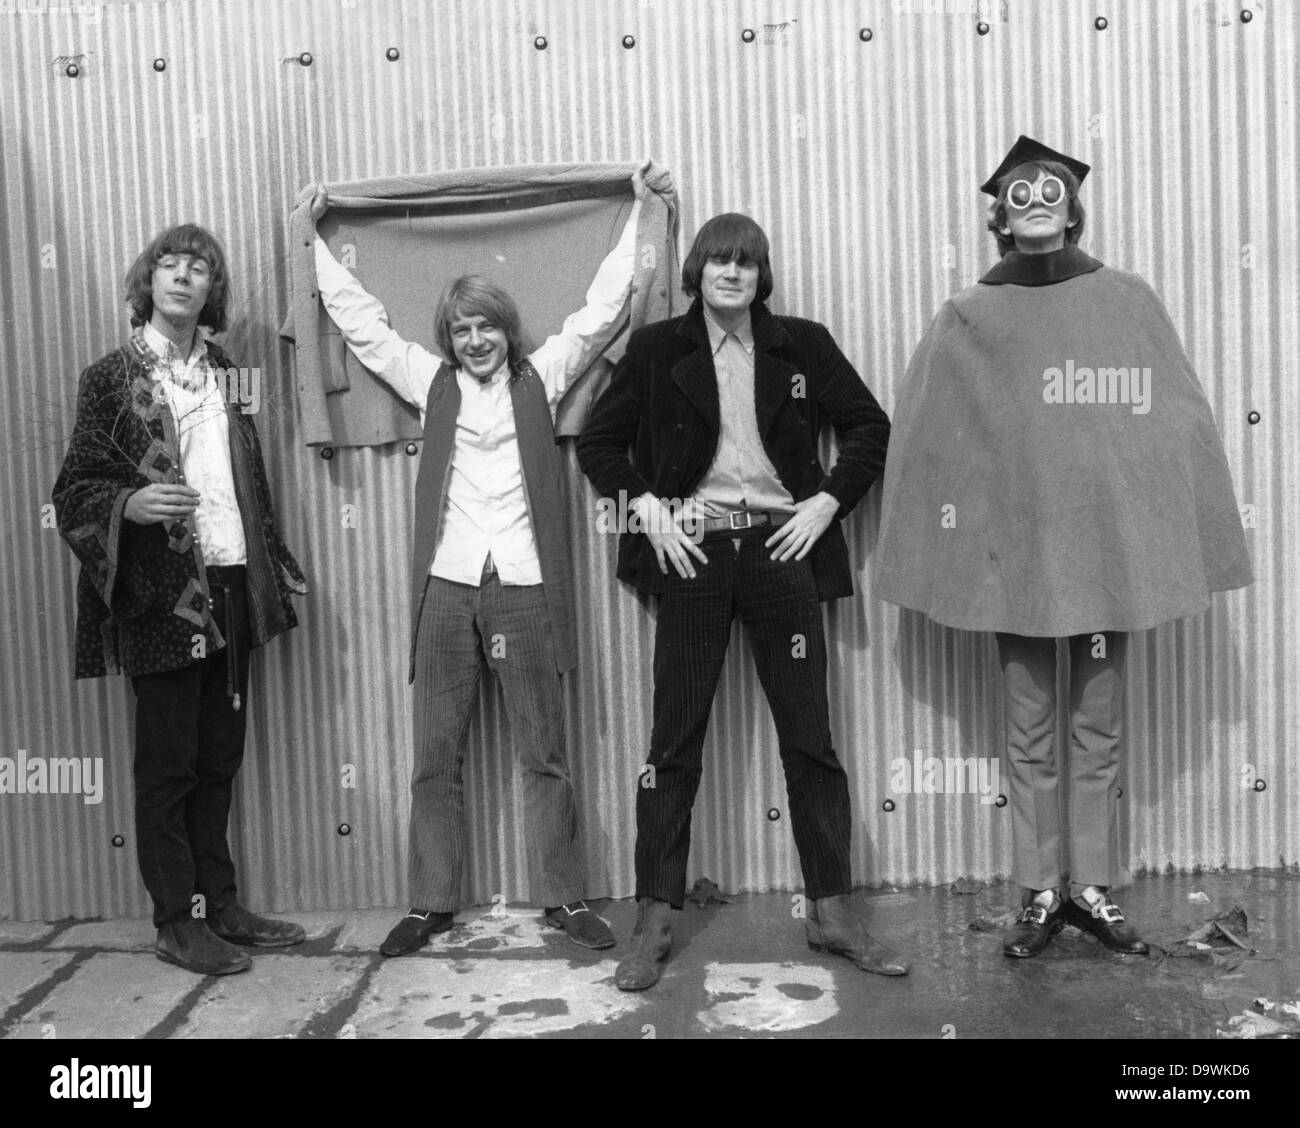 THE SOFT MACHINE UK pop group in 1966. Stock Photo